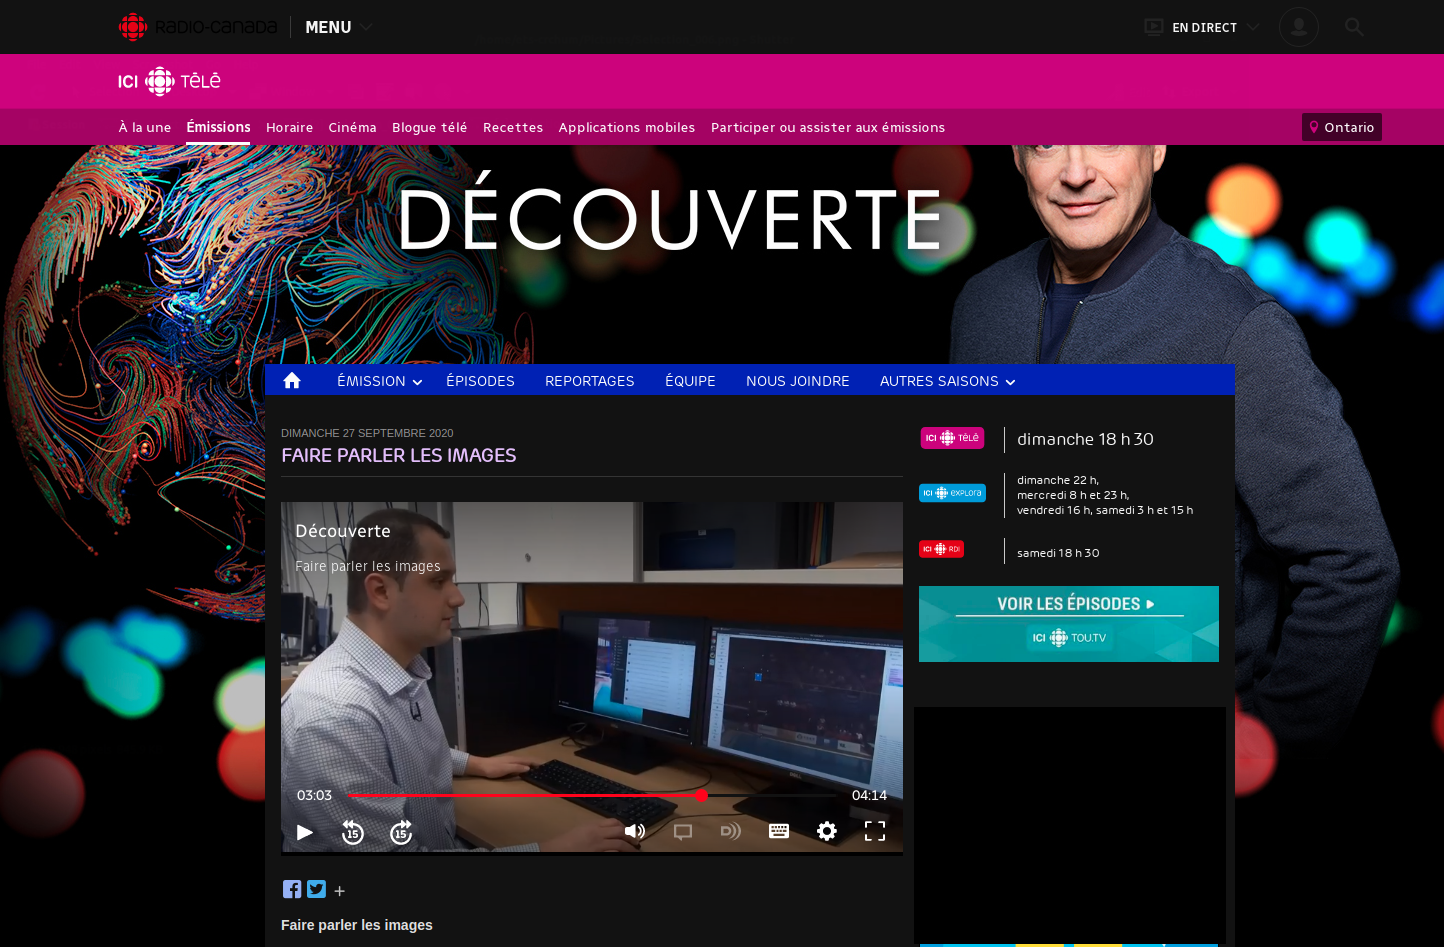 Ramon Figueiredo's Ph.D. project at Decouverte (Television series) ICI.Radio-Canada.ca Sunday, September 27, 2020